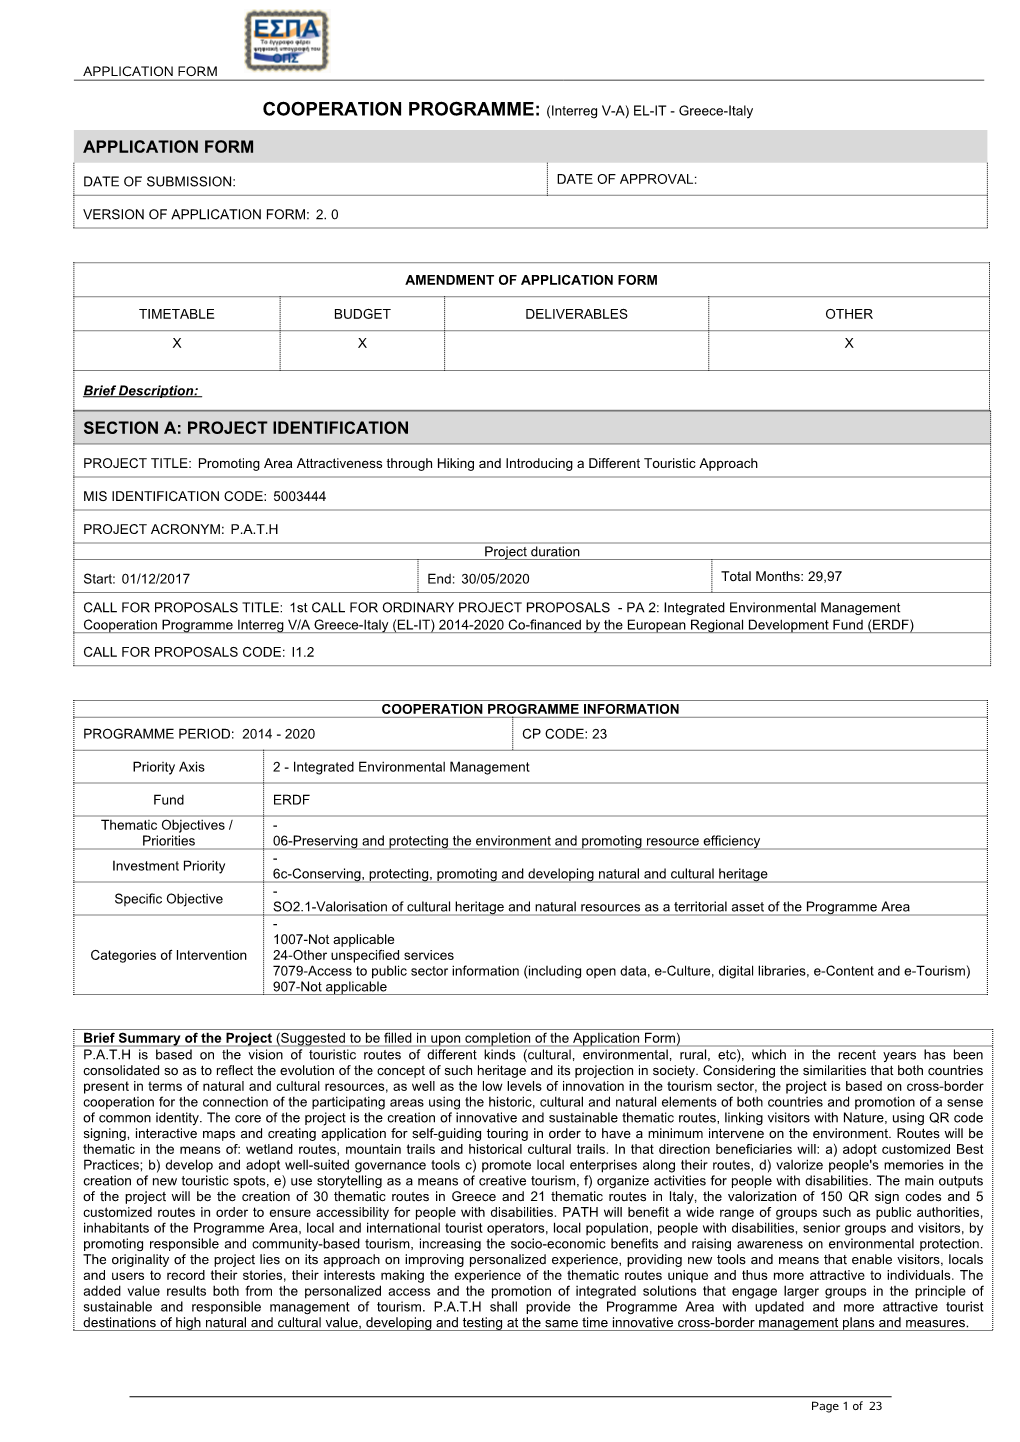 Application Form Section A